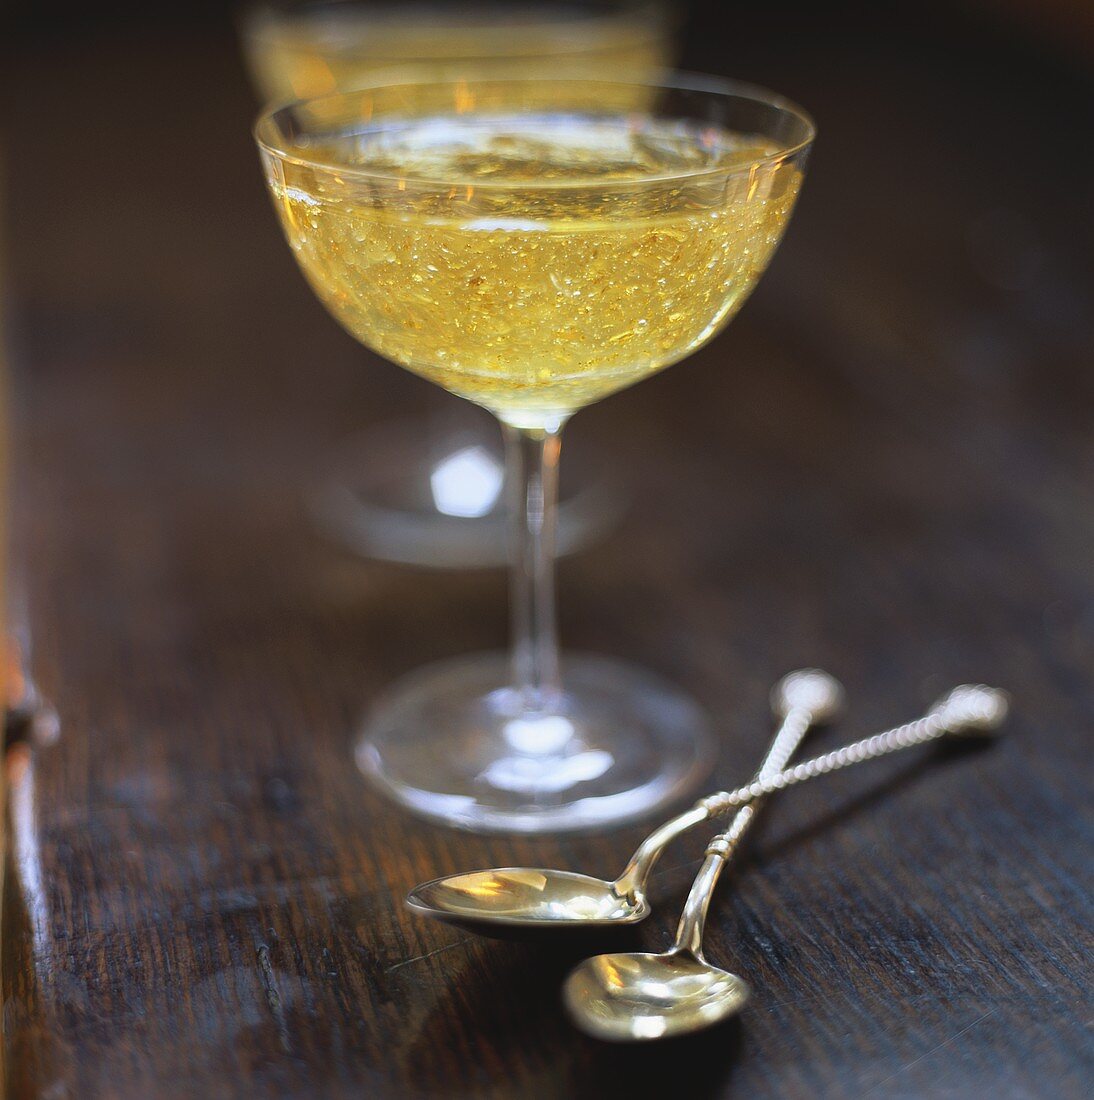 Champagne jelly in a stemmed glass